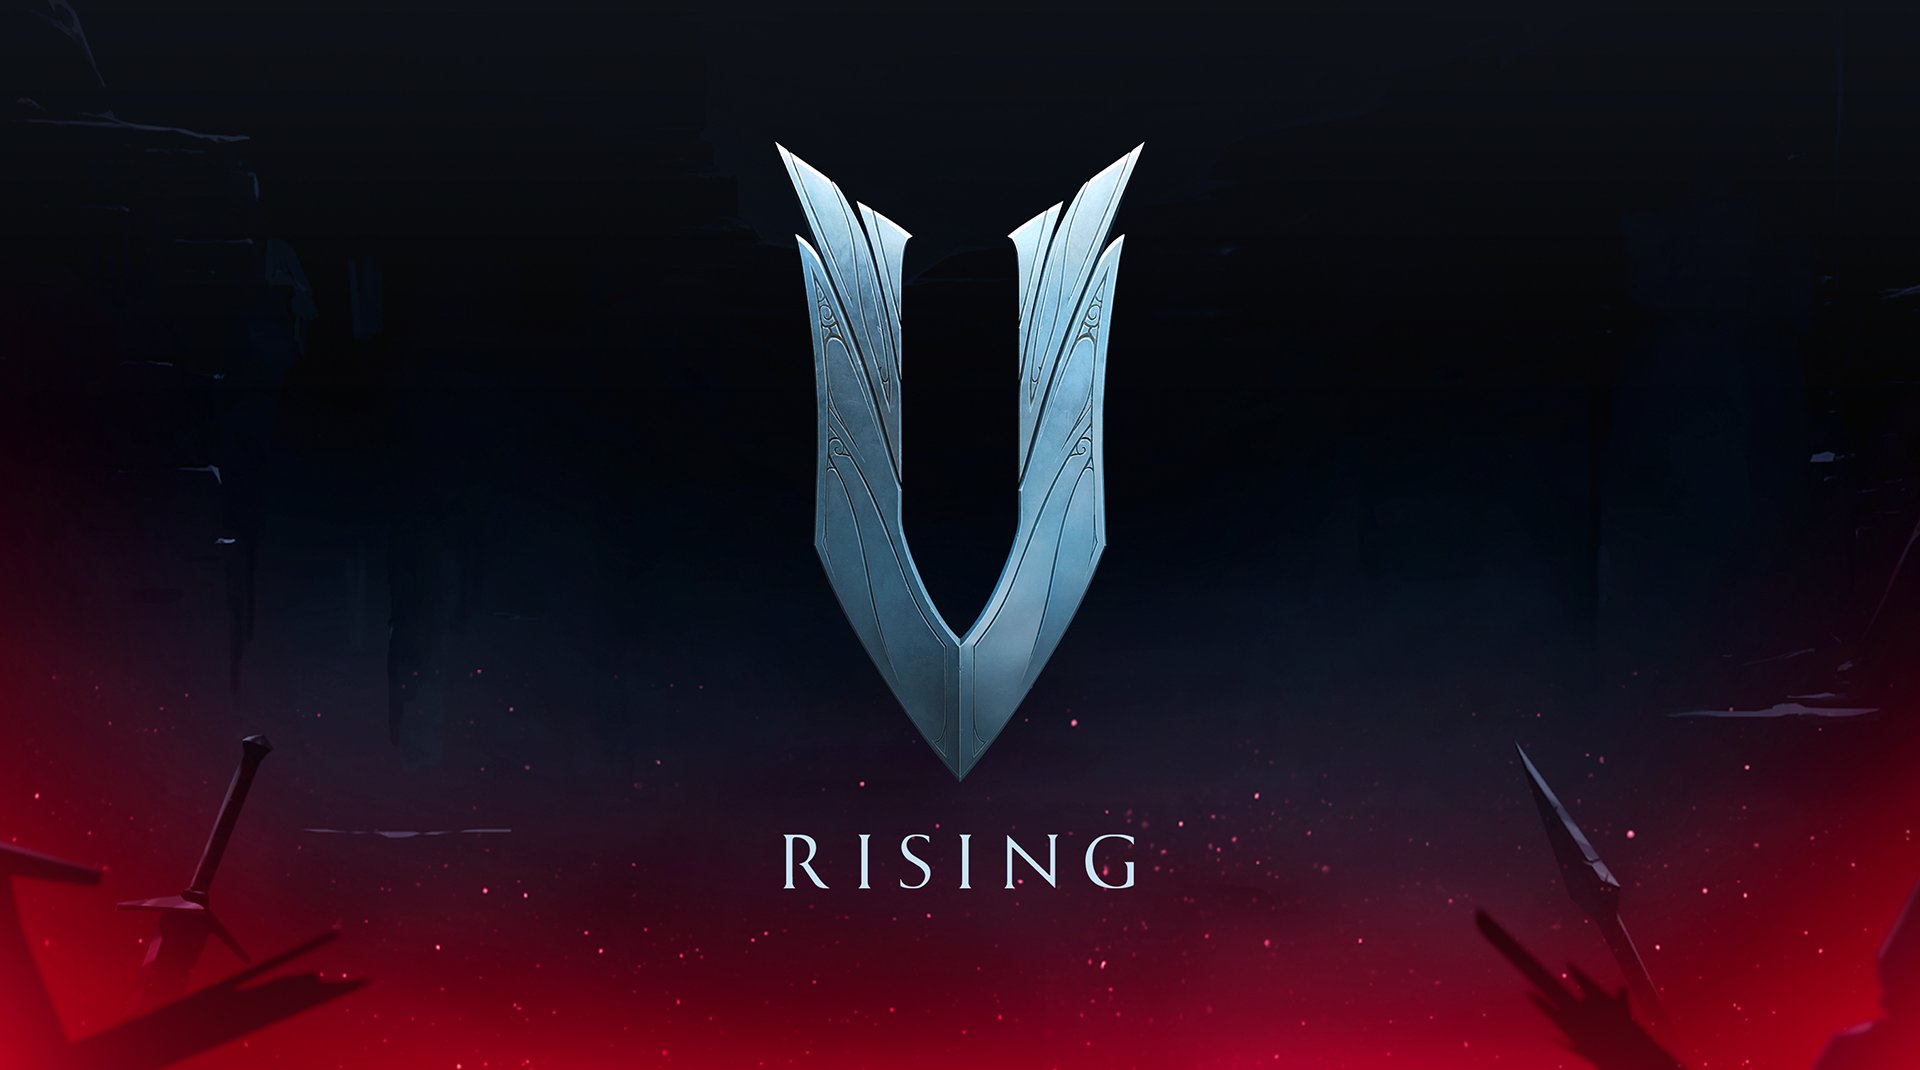 V Rising year of the vampire has arrived. V Rising comes in don't miss your chance to be one of the eldest bloodlines and wishlist now. Wishlist V